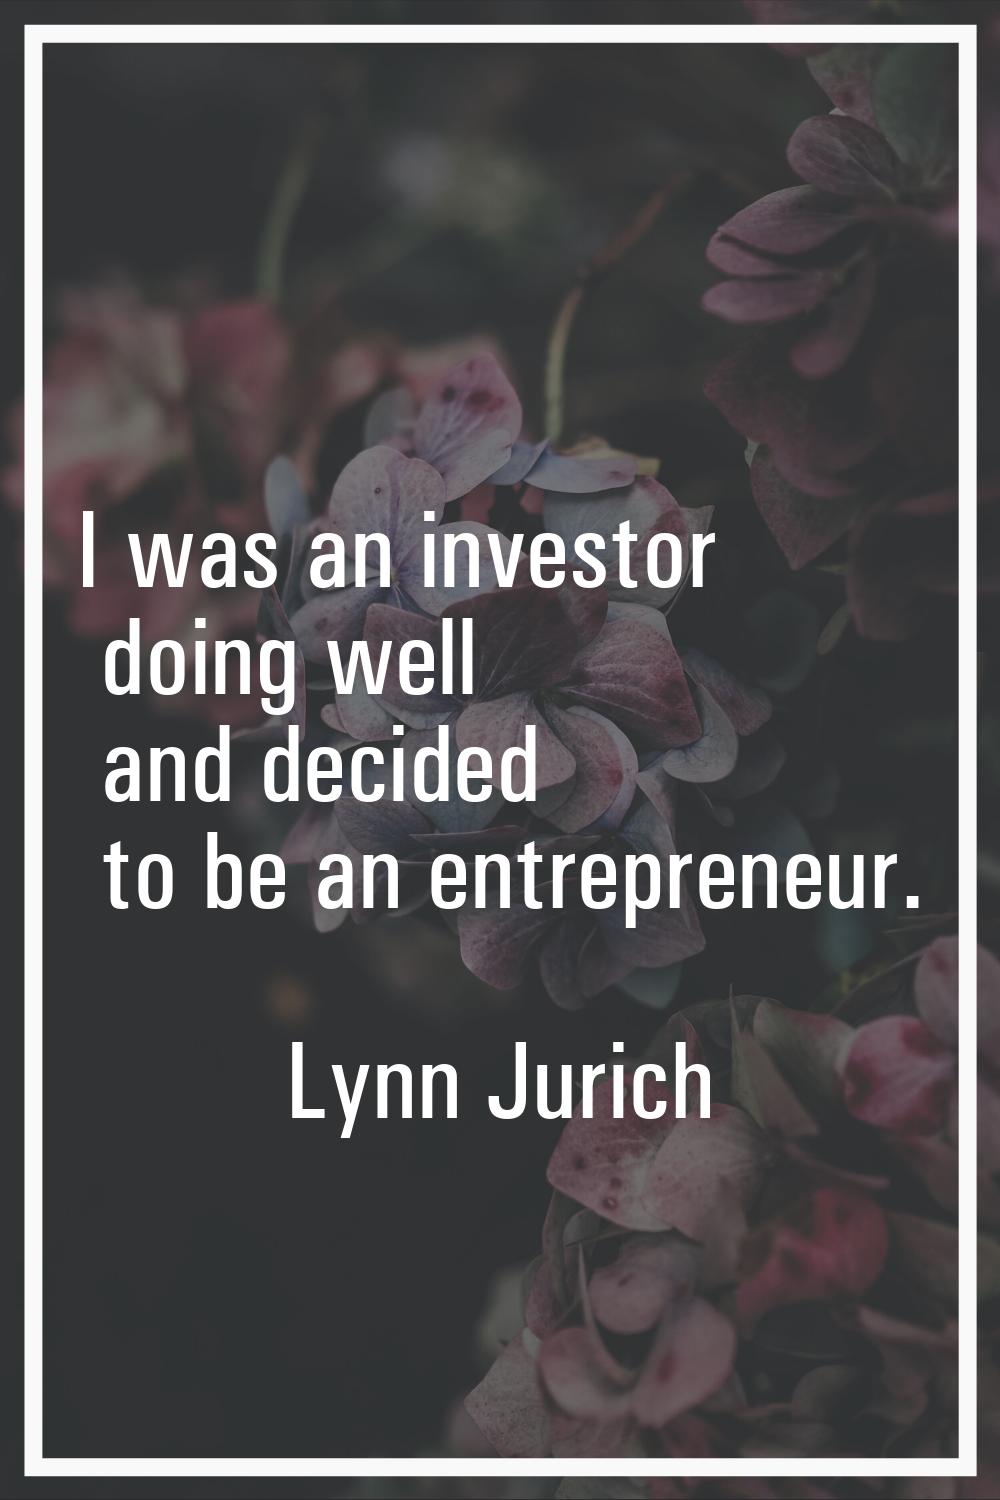 I was an investor doing well and decided to be an entrepreneur.